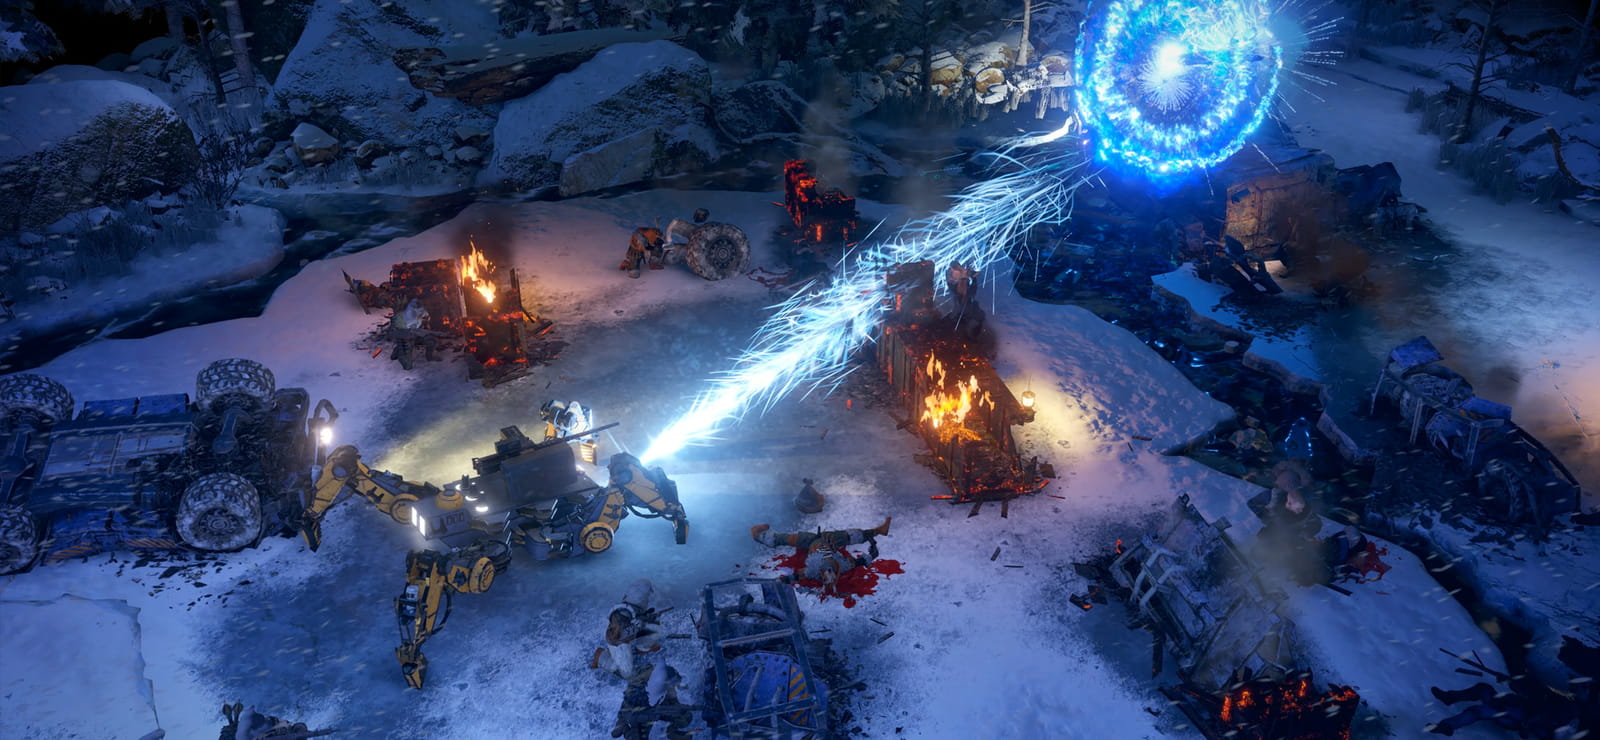 Wasteland 3 - Deluxe Edition Upgrade